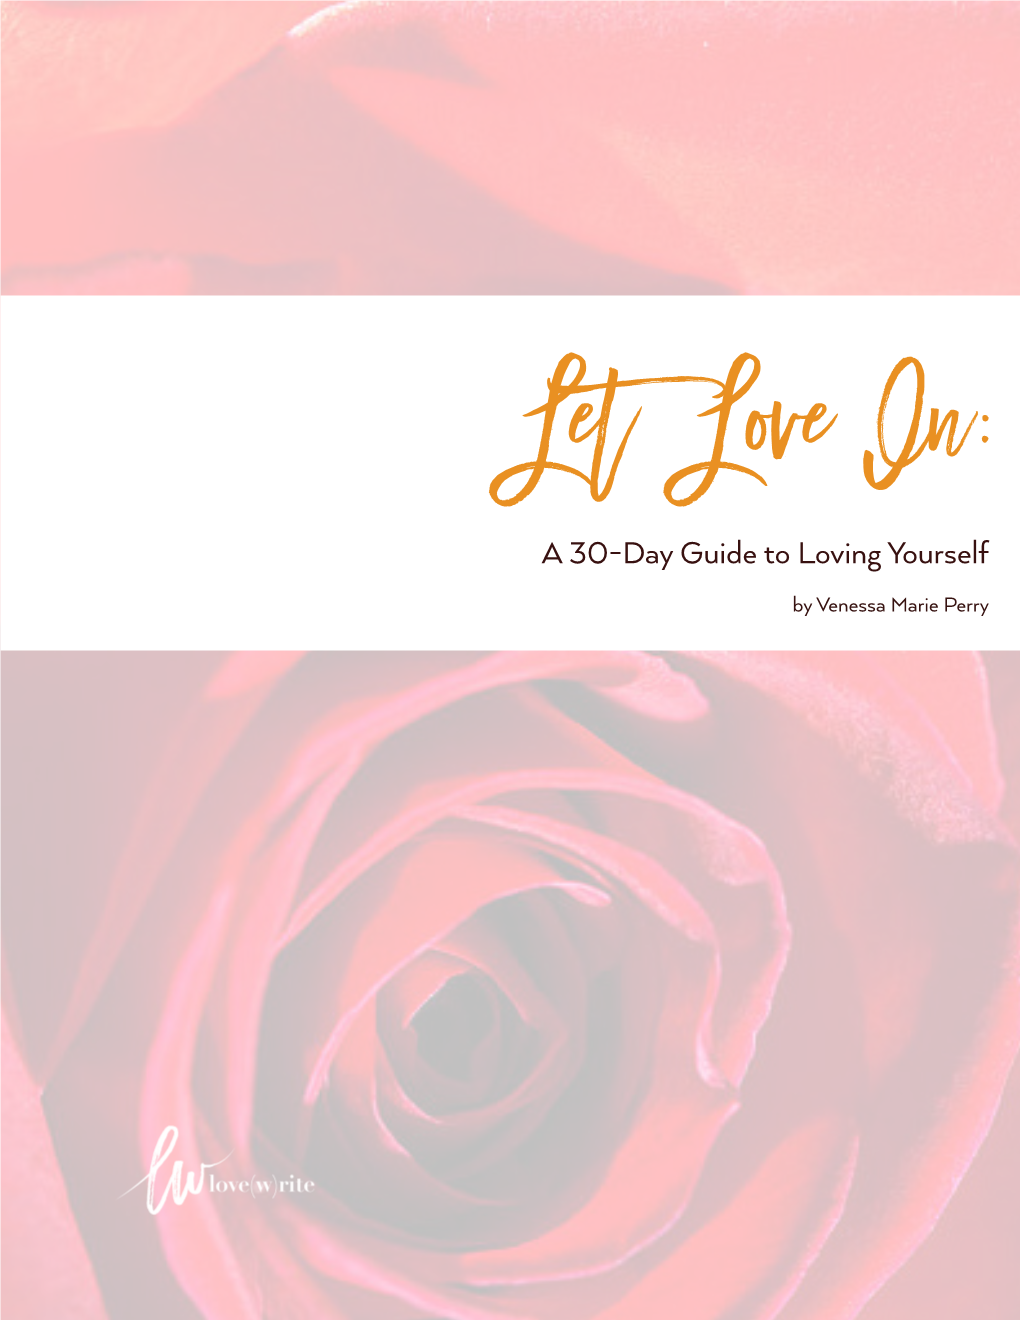 Let Love In: a 30-Day Guide to Loving Yourself by Venessa Marie Perry